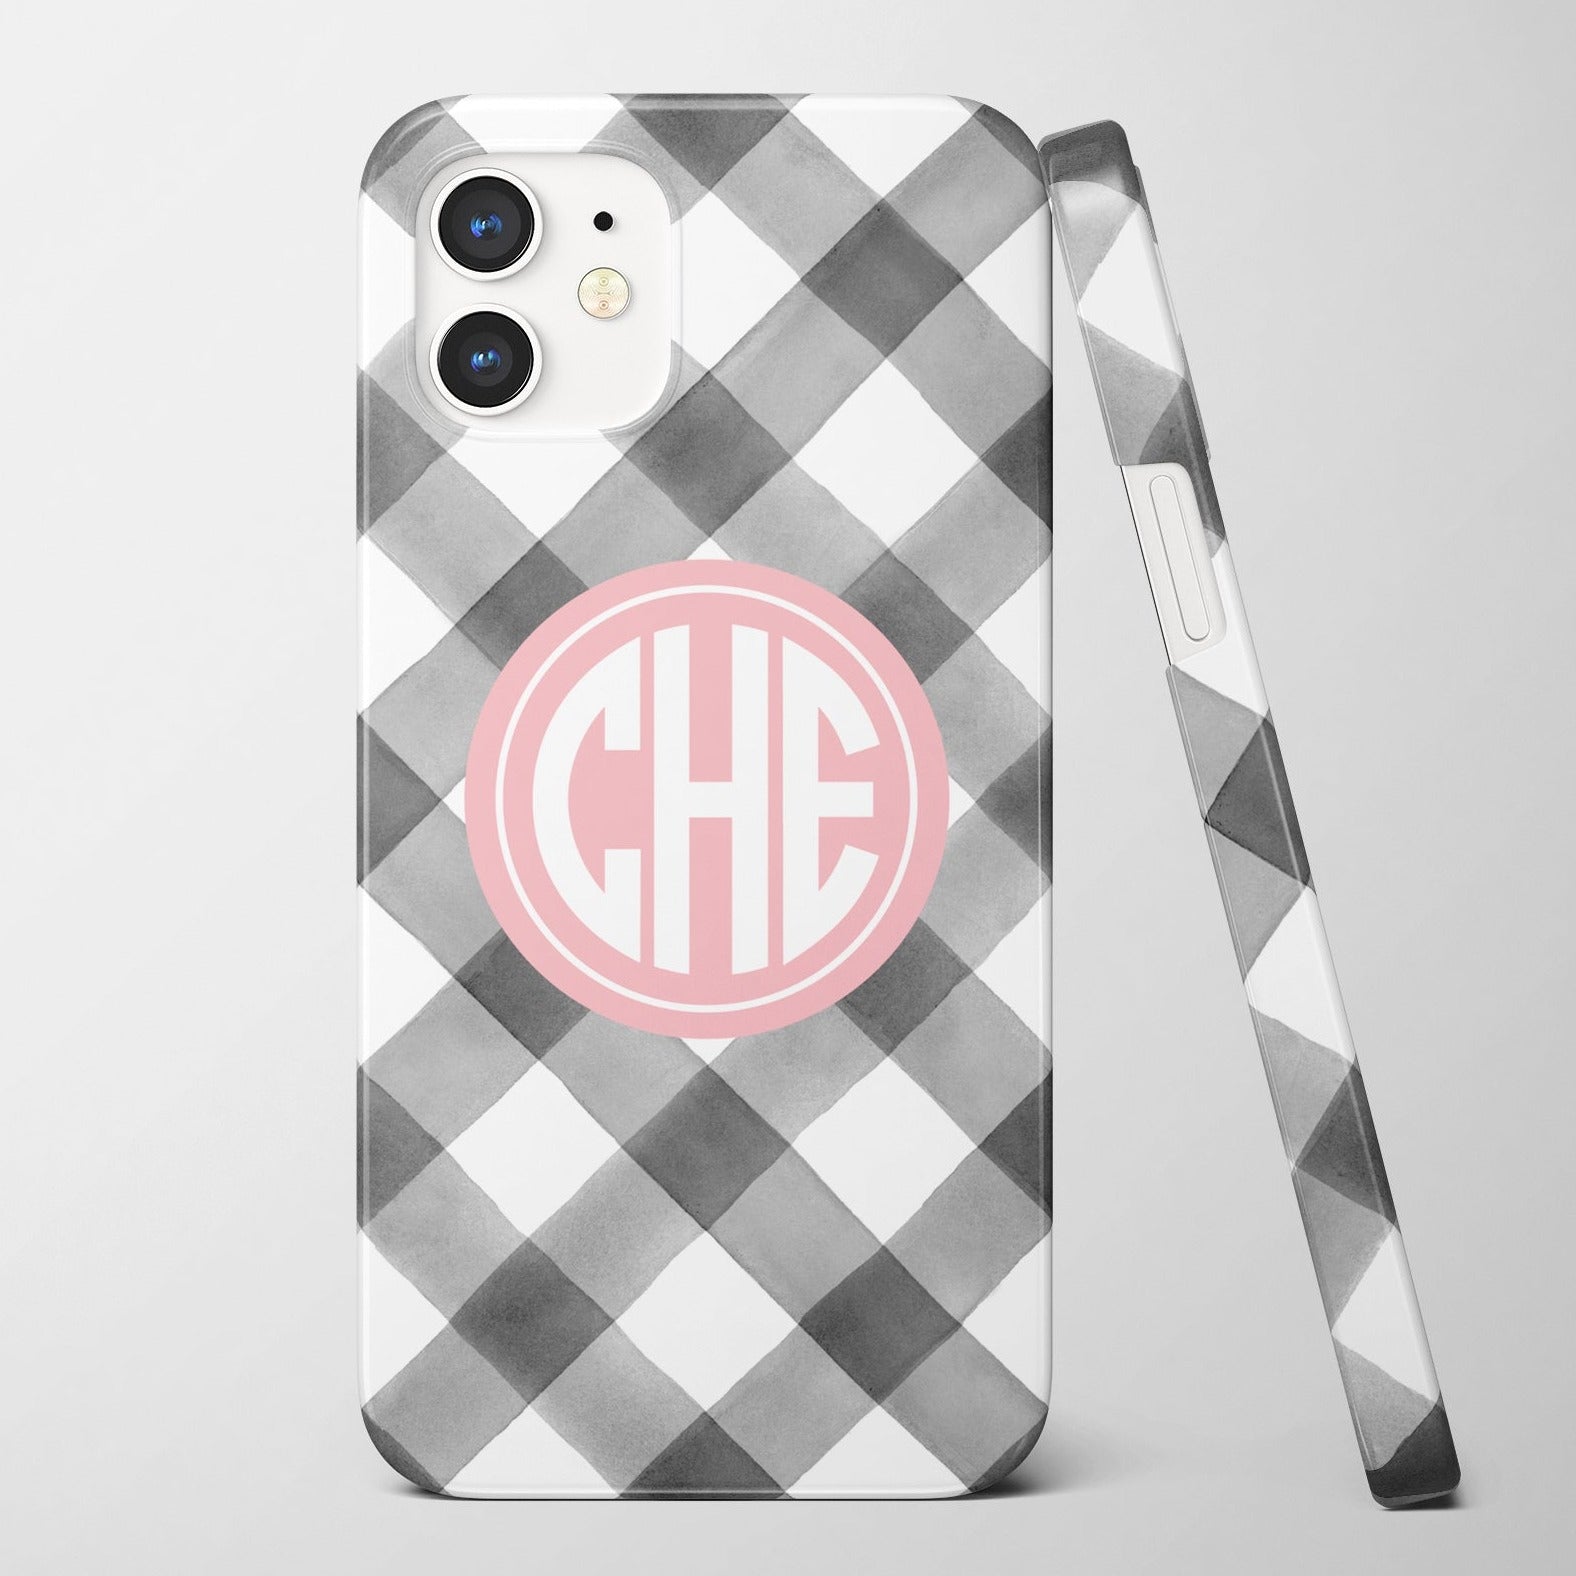 Monogram iPhone case with Gingham pattern in  a soft gray, monogram color can be customized